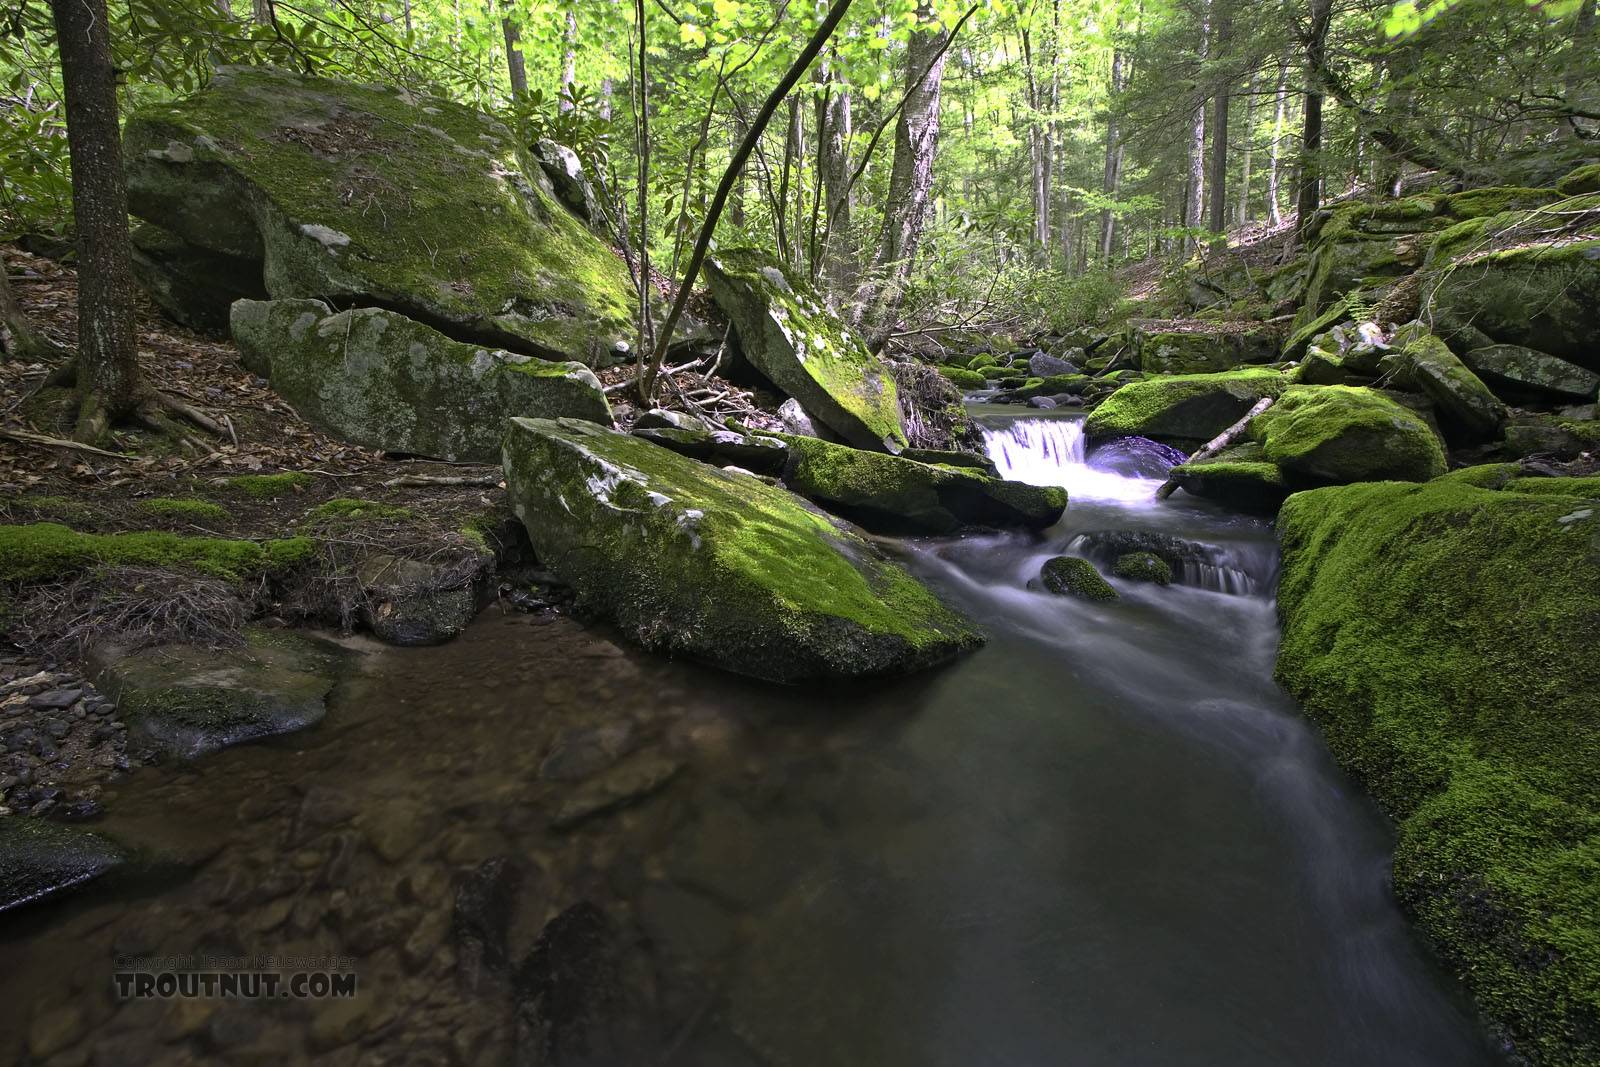  From Wolf Brook (Neversink Gorge) in New York.